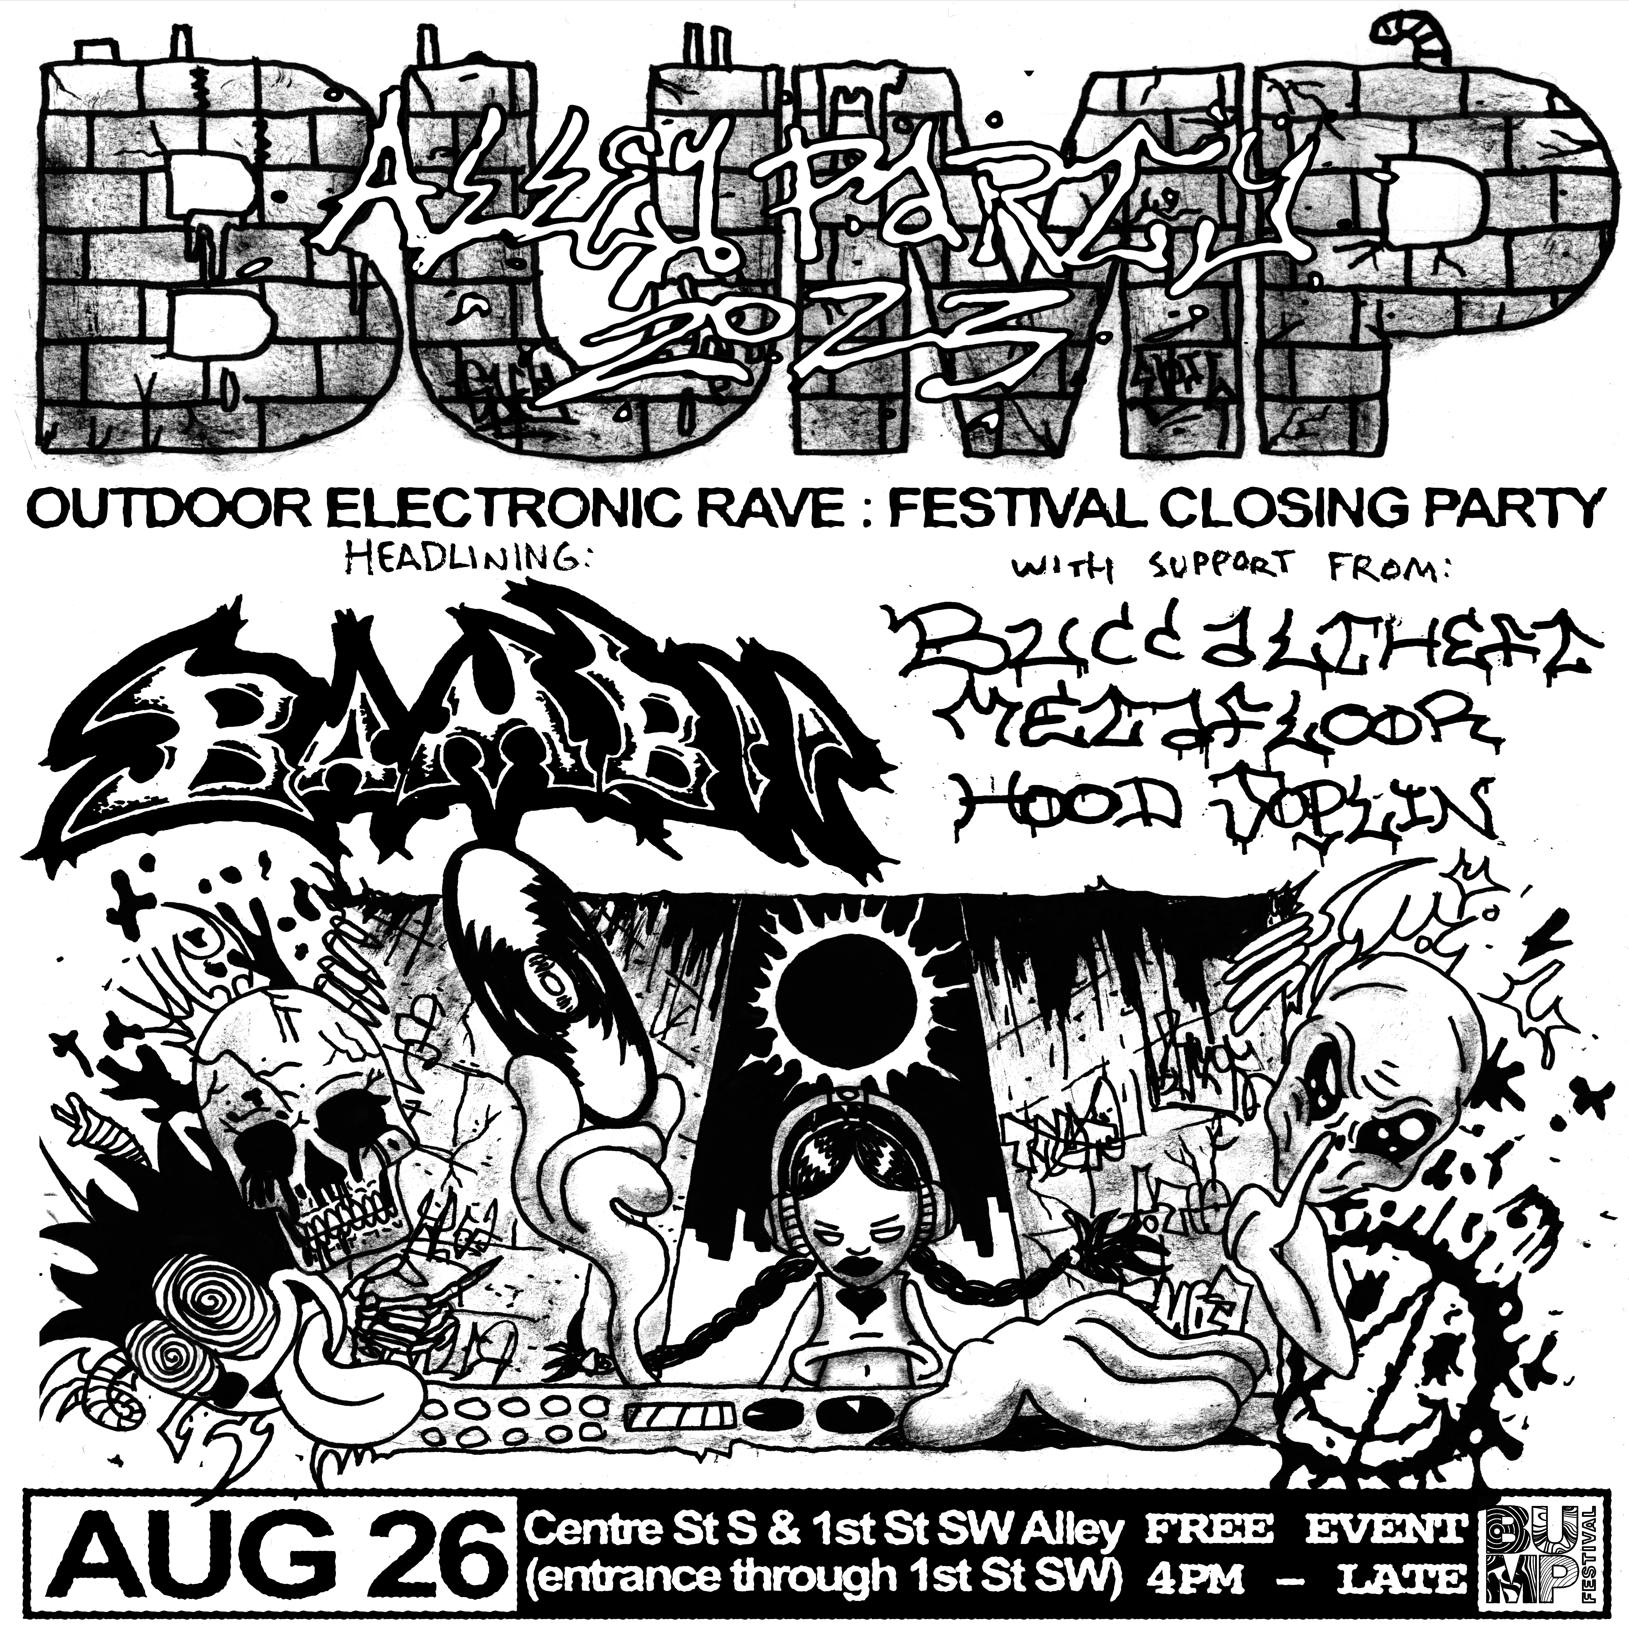 Bump alley party poster. Bump logo up top, and various art throughou thte image. 

Image reads: 

BUMP OUTDOOR ELECTRONIC RAVE: FESTIVAL CLOSING PARTY
Headlining: Bambii
With Support from: 
 @hoodjoplin @metafloor and @buccaltheft.

AUG 26 Centre St S and 1st SW Alley (Entrance through 1st St SW). FREE EVENT 4pm - LATE